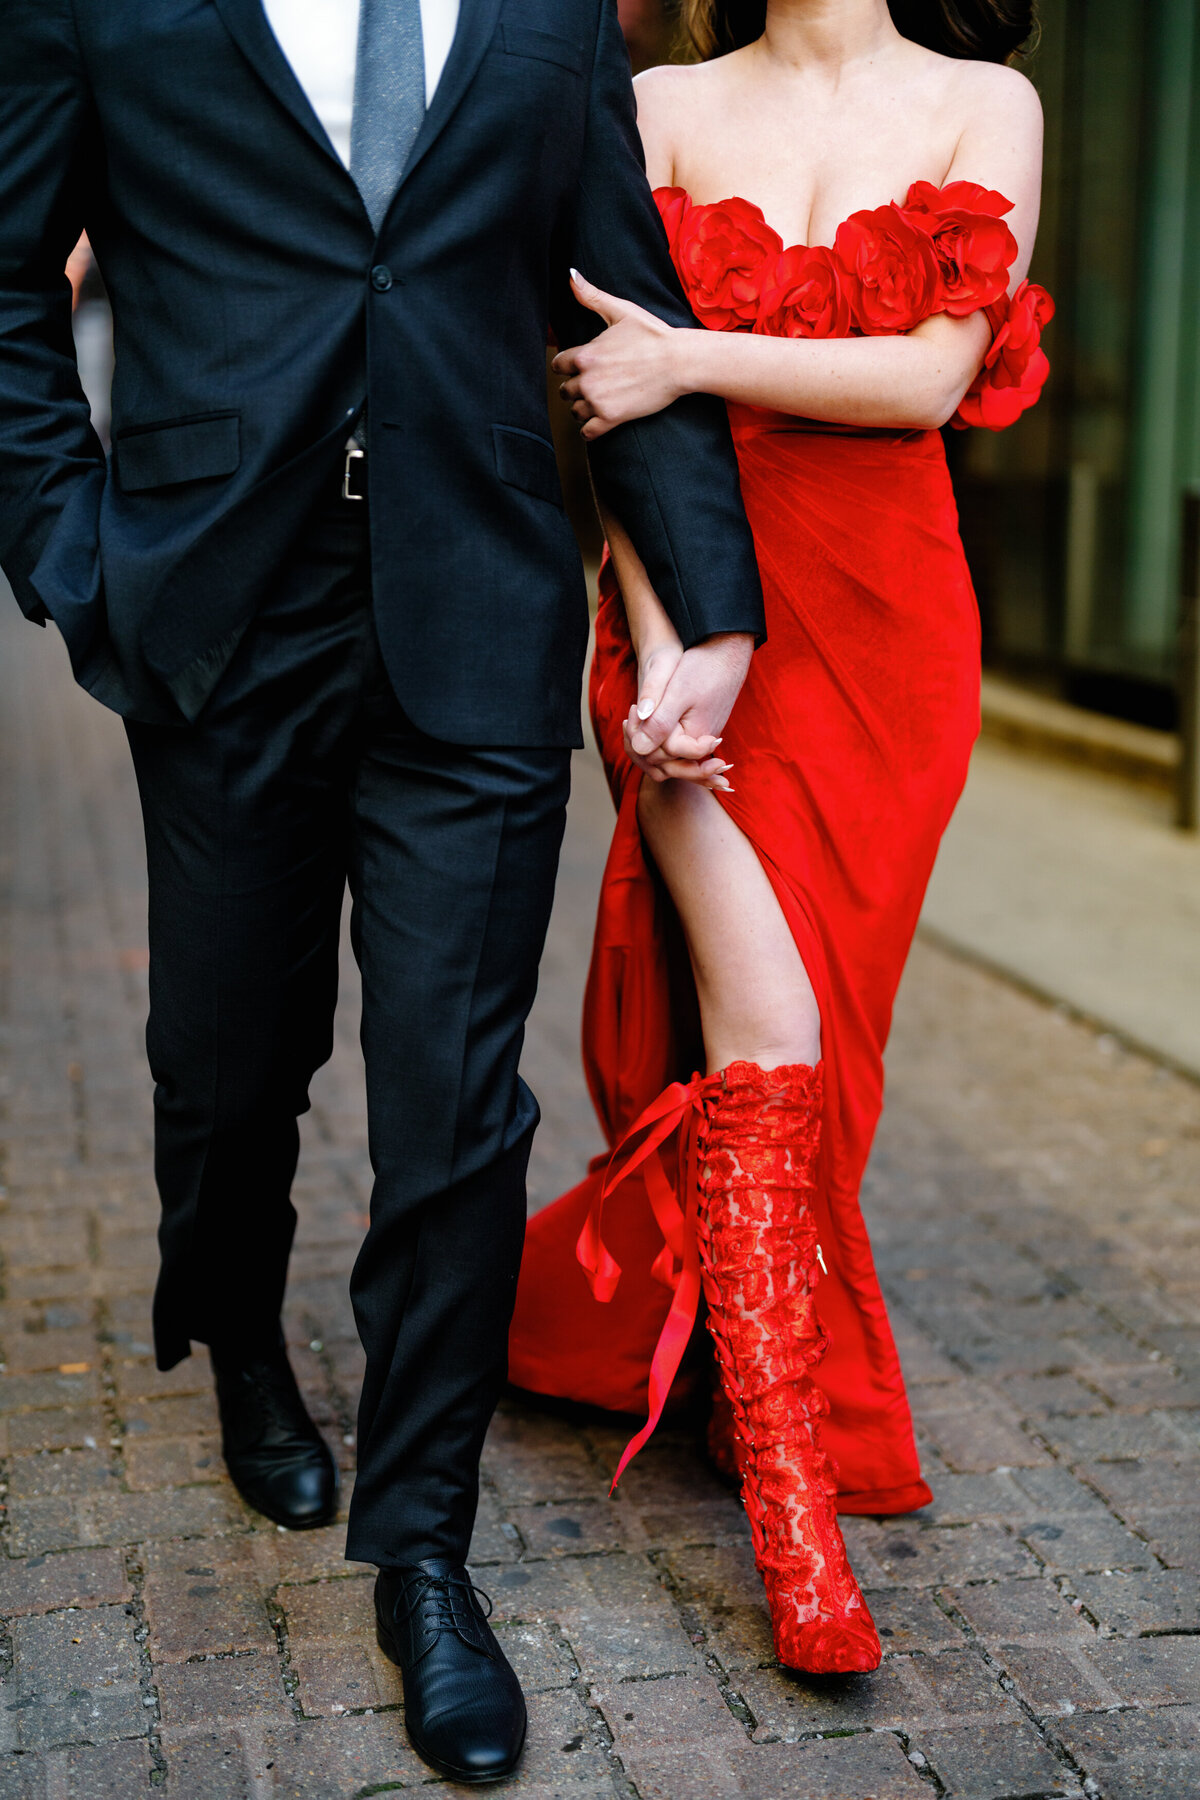 Aspen-Avenue-Chicago-Wedding-Photographer-Union-Station-Chicago-Theater-Engagement-Session-Timeless-Romantic-Red-Dress-Editorial-Stemming-From-Love-Bry-Jean-Artistry-The-Bridal-Collective-True-to-color-Luxury-FAV-91